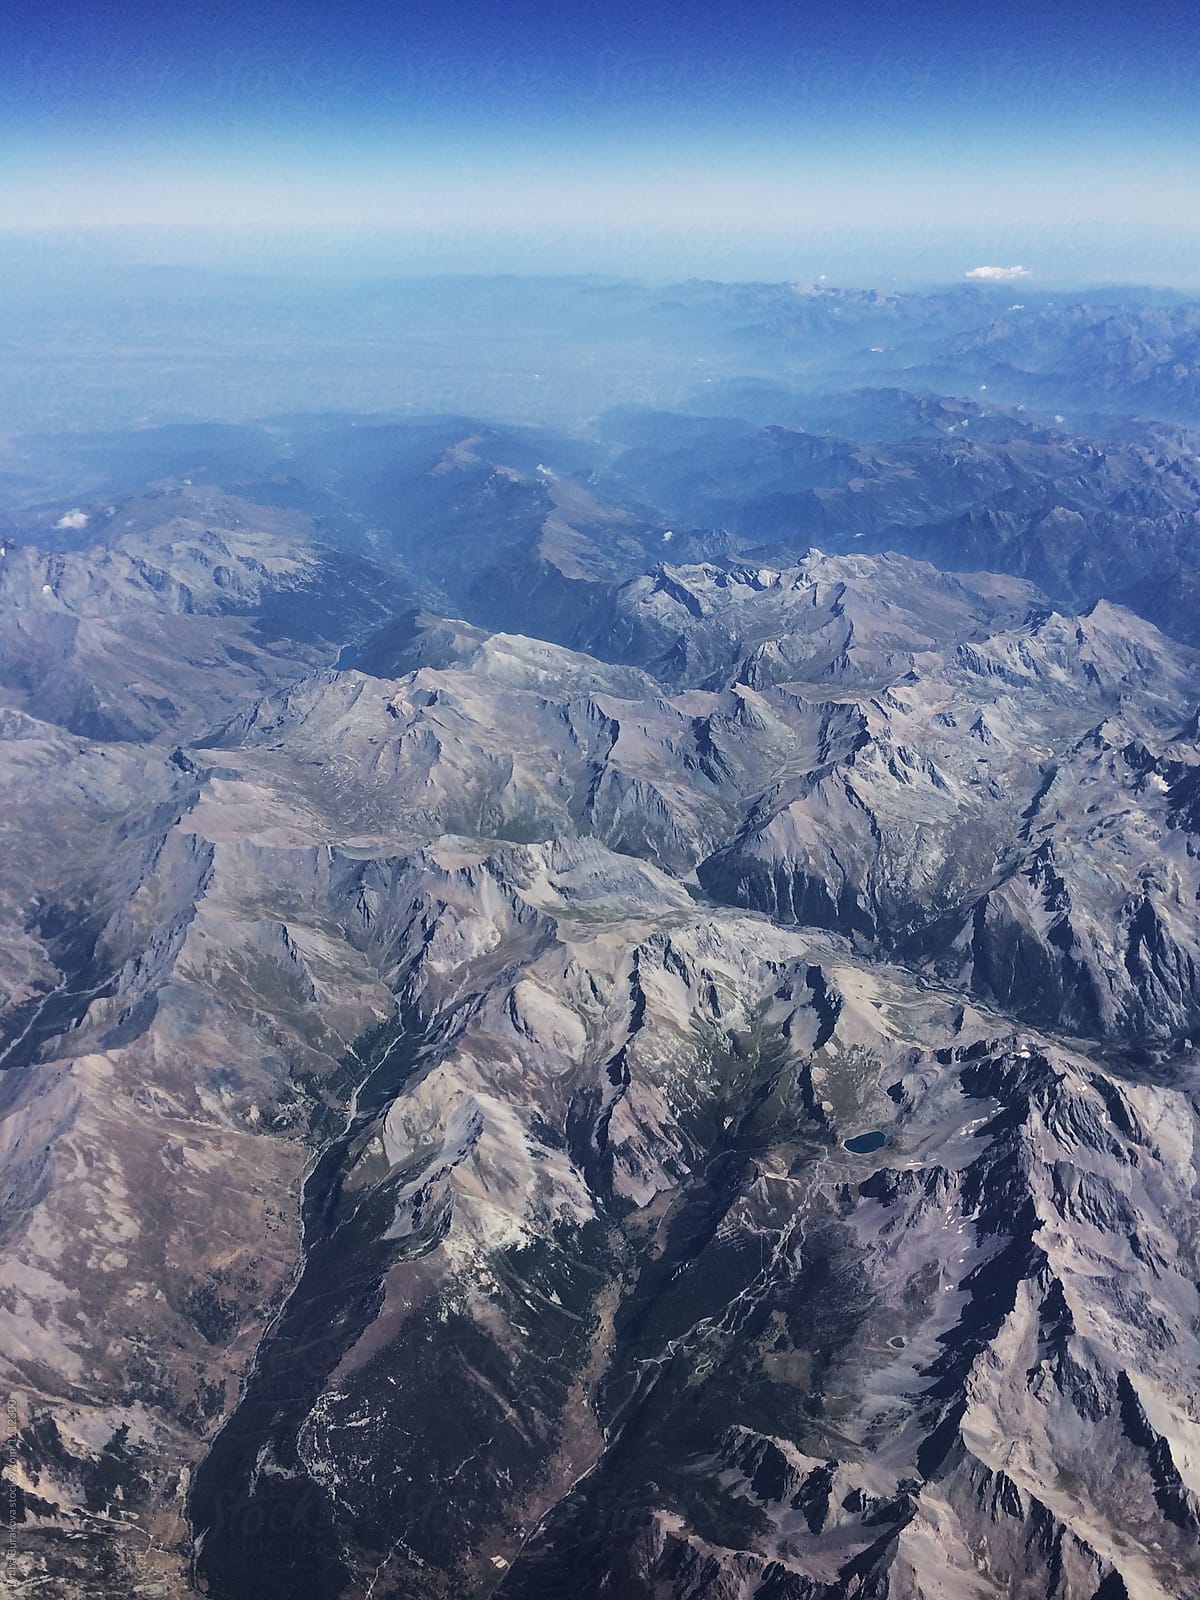 View on Alps from airplane